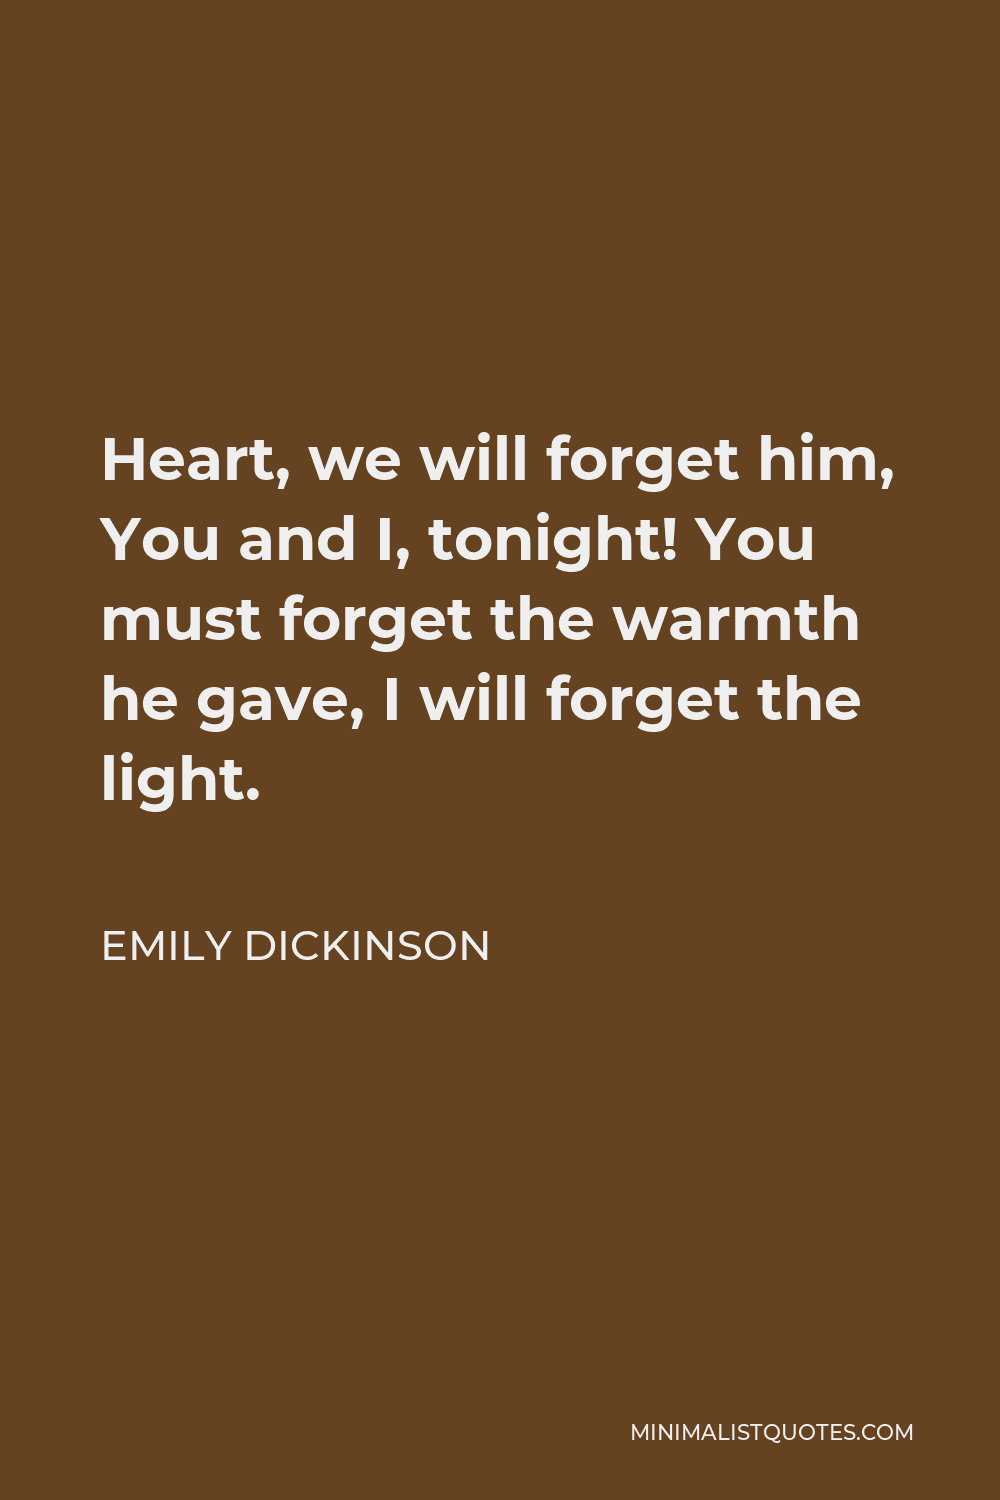 Emily Dickinson Quote - Heart, we will forget him, You and I, tonight! You must forget the warmth he gave, I will forget the light.